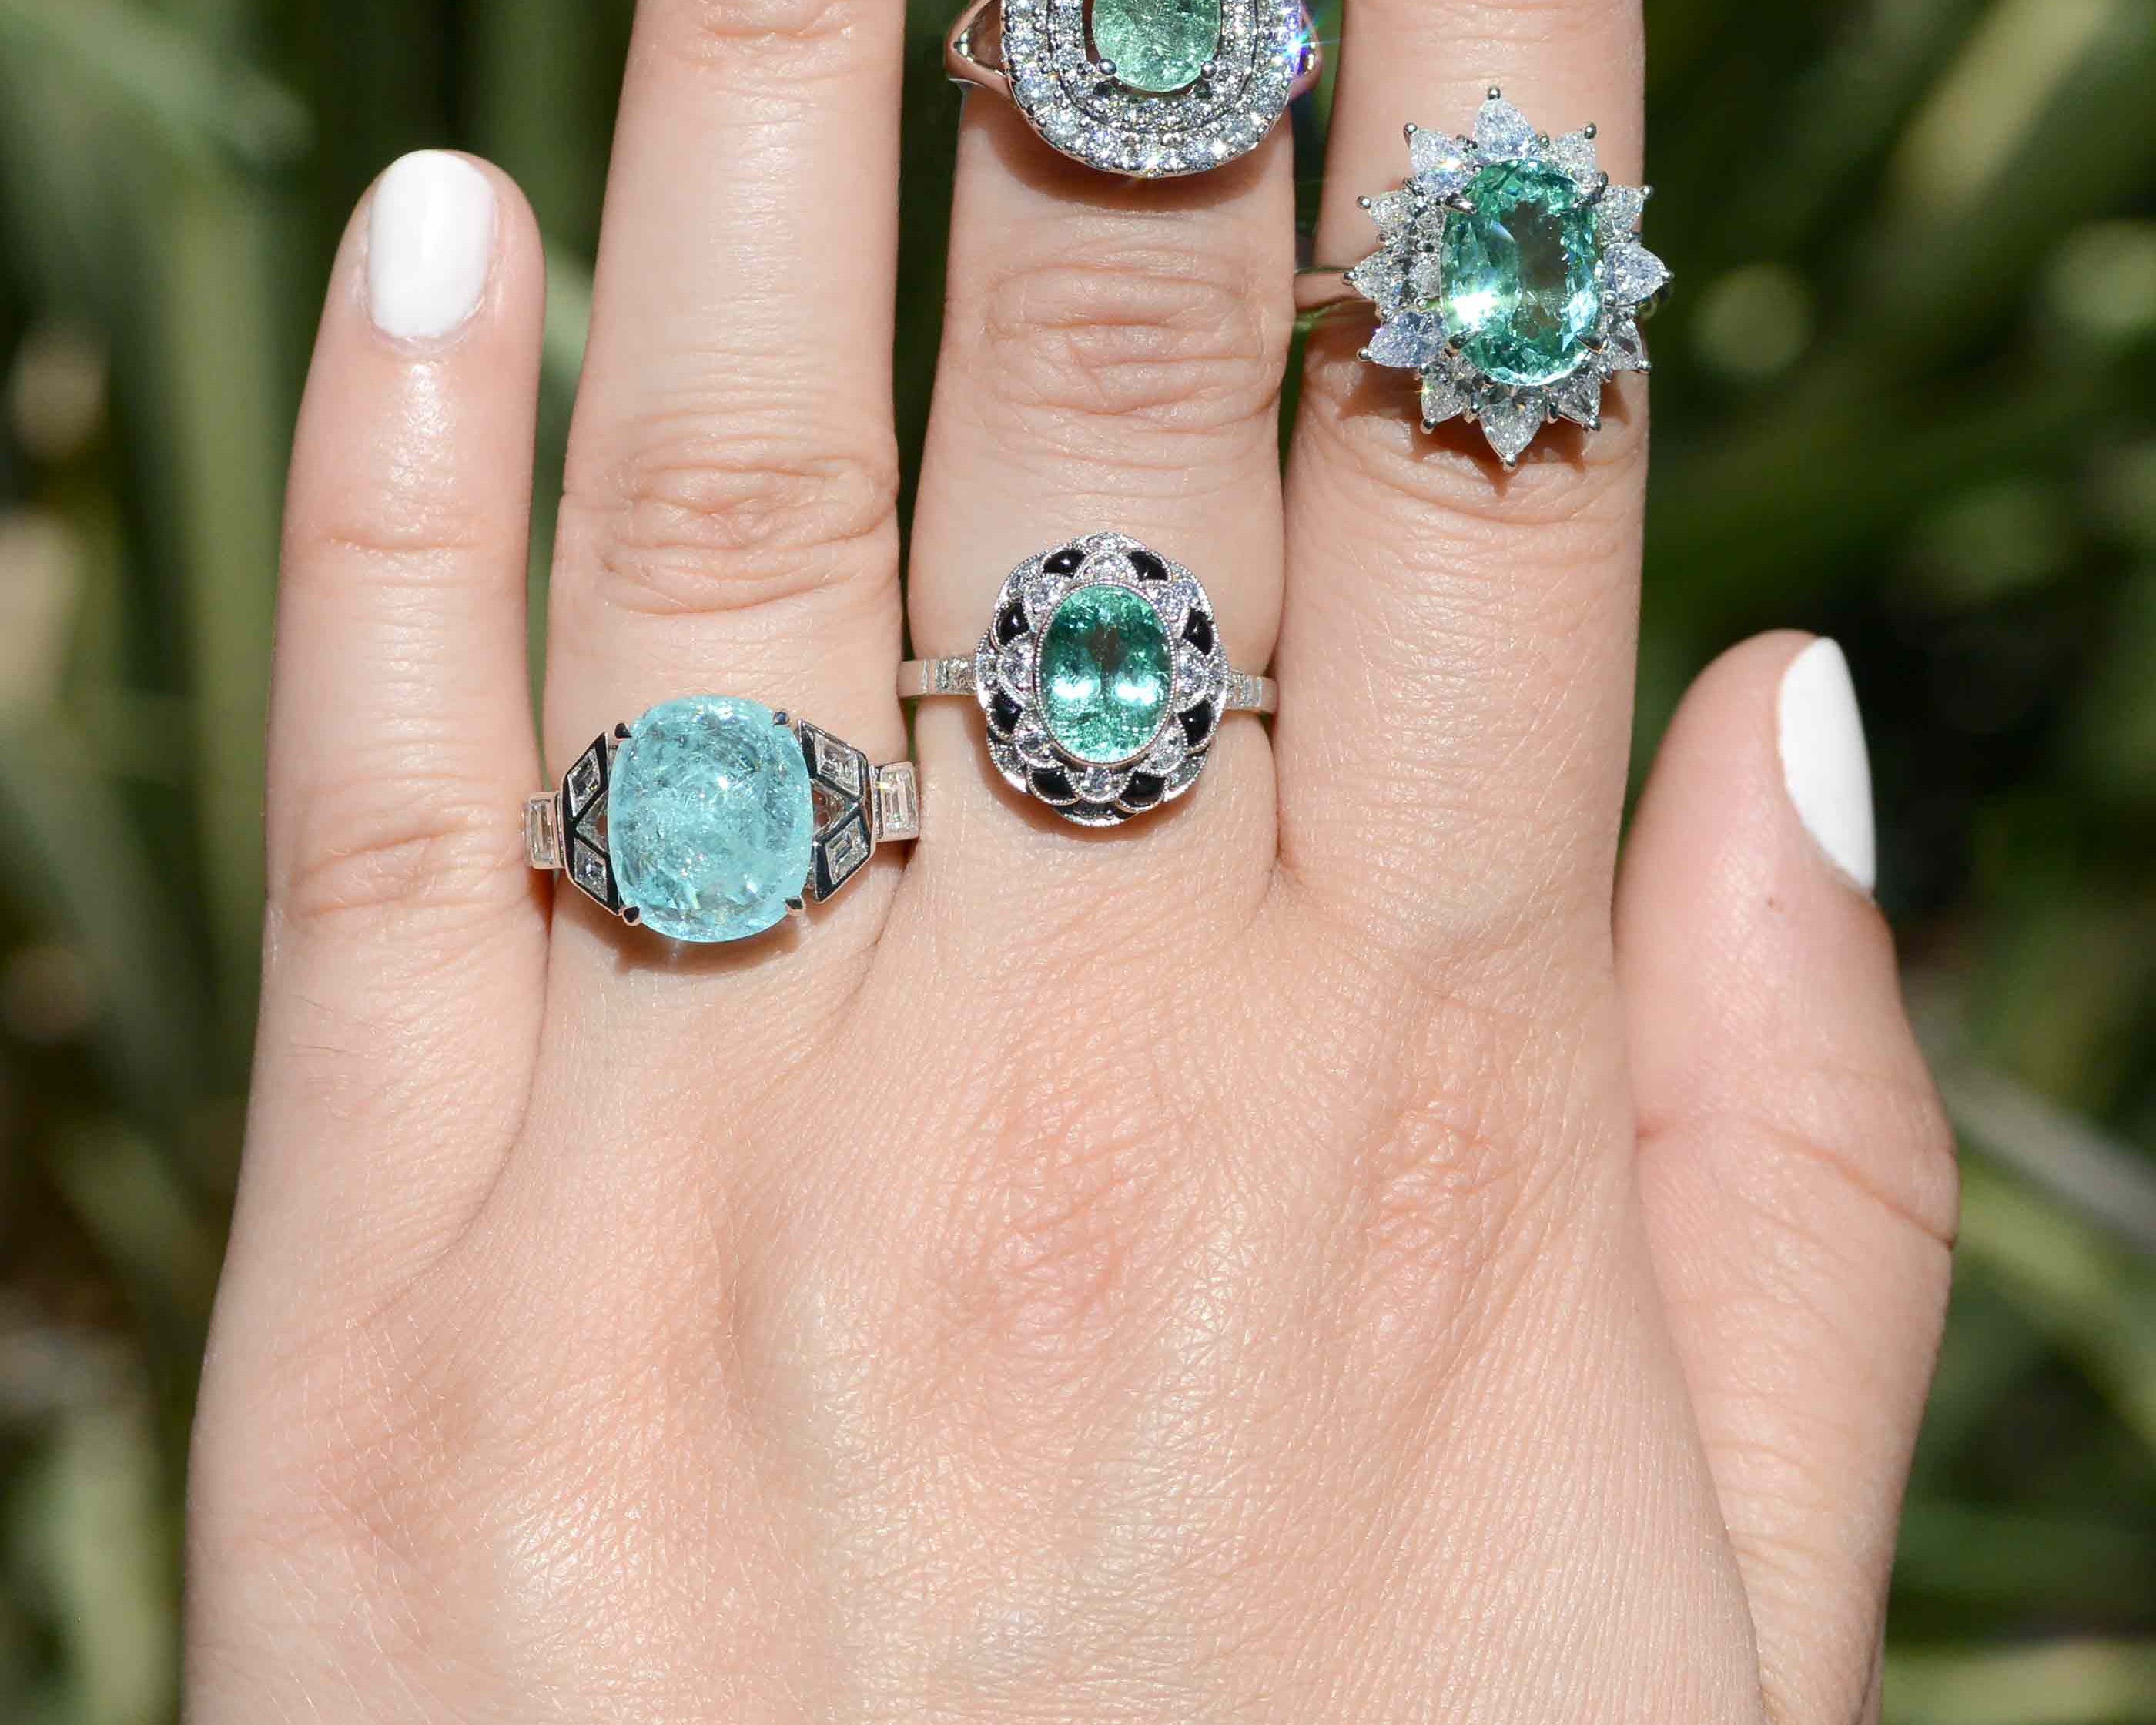 A collection of paraiba tourmaline rings in stock, with the color ranging from aqua to bluish sea-foam green.